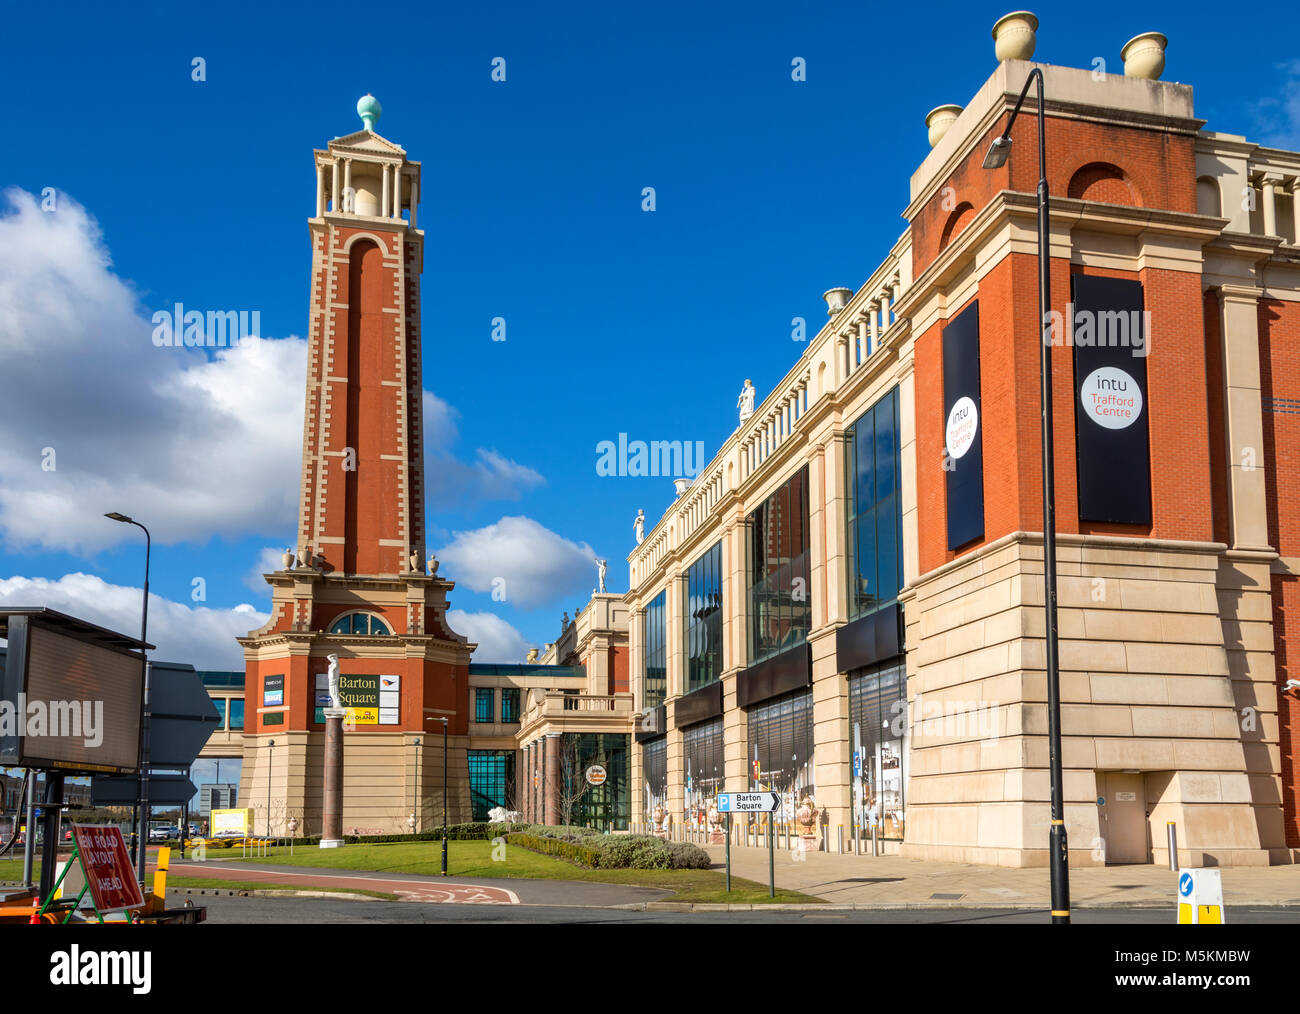 The tower at the entrance to Barton Square at the intu Trafford Centre, Manchester, UK Stock Photo